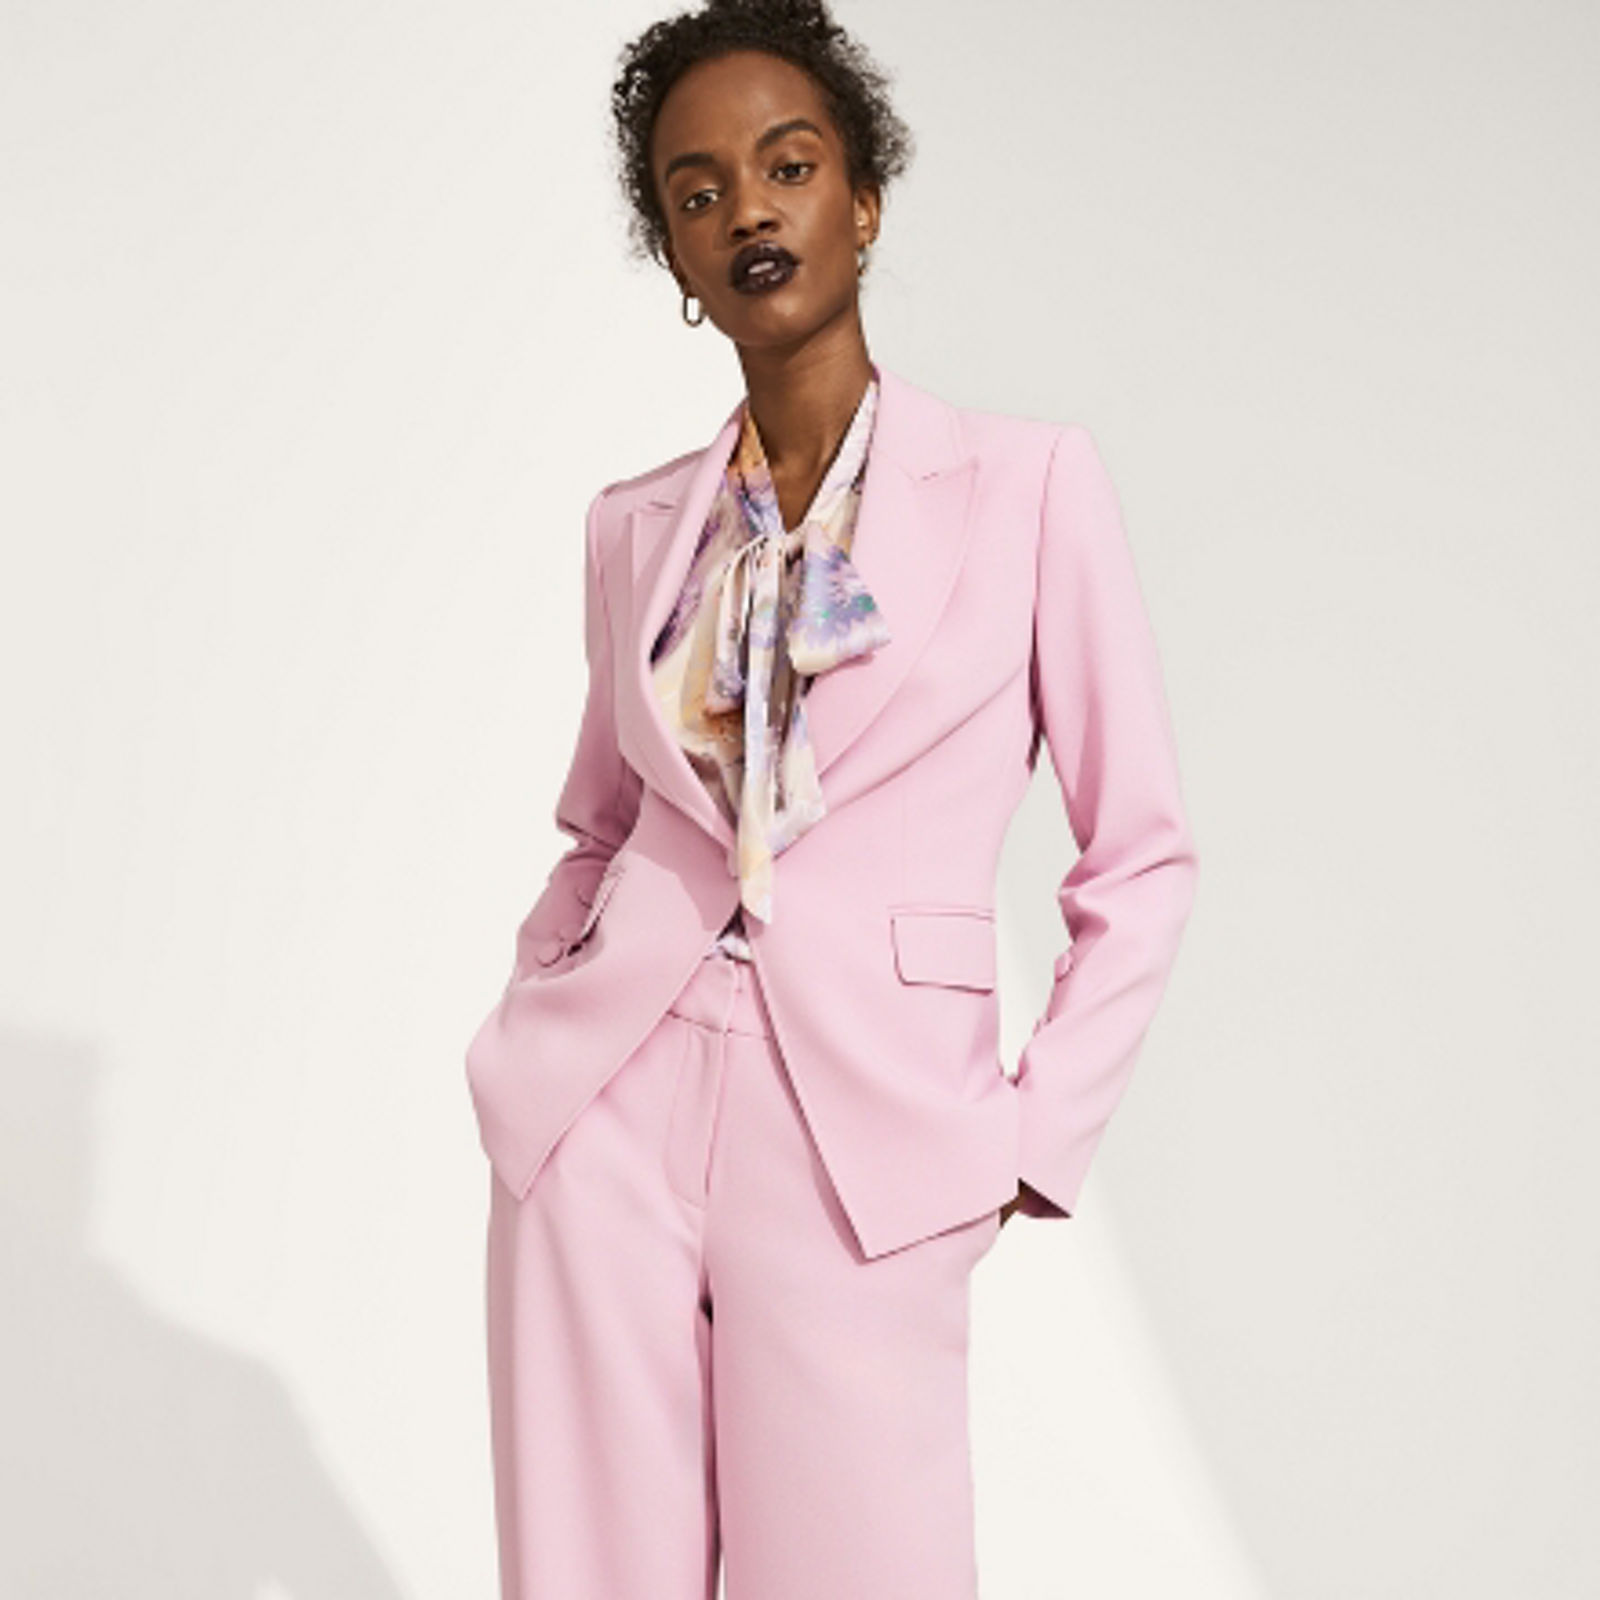 Tahari Women's Suits for sale in New York, New York, Facebook Marketplace